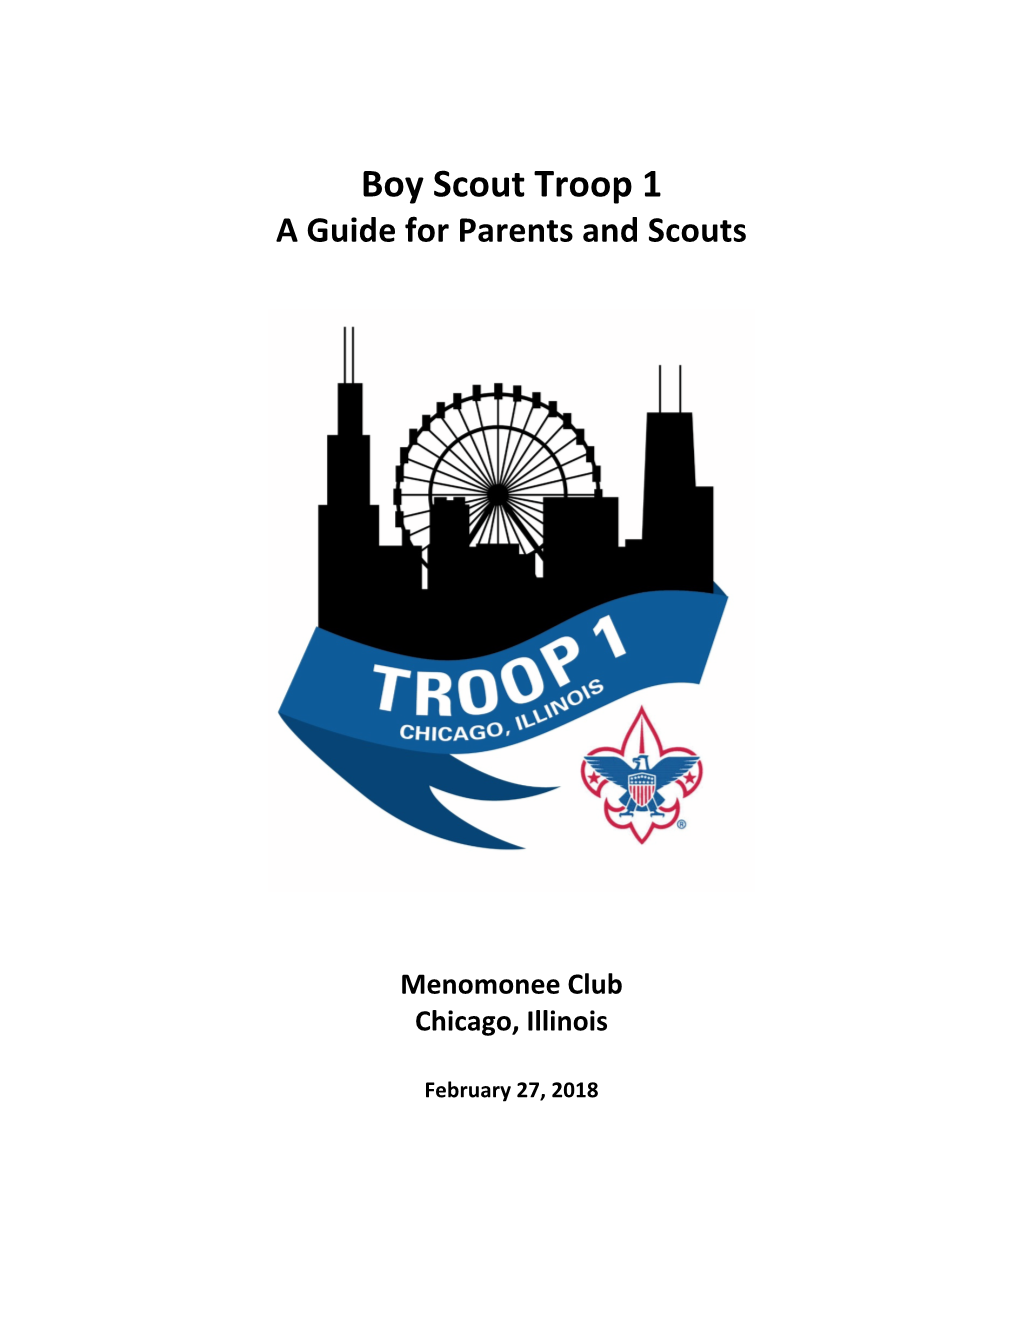 Boy Scout Troop 1 a Guide for Parents and Scouts